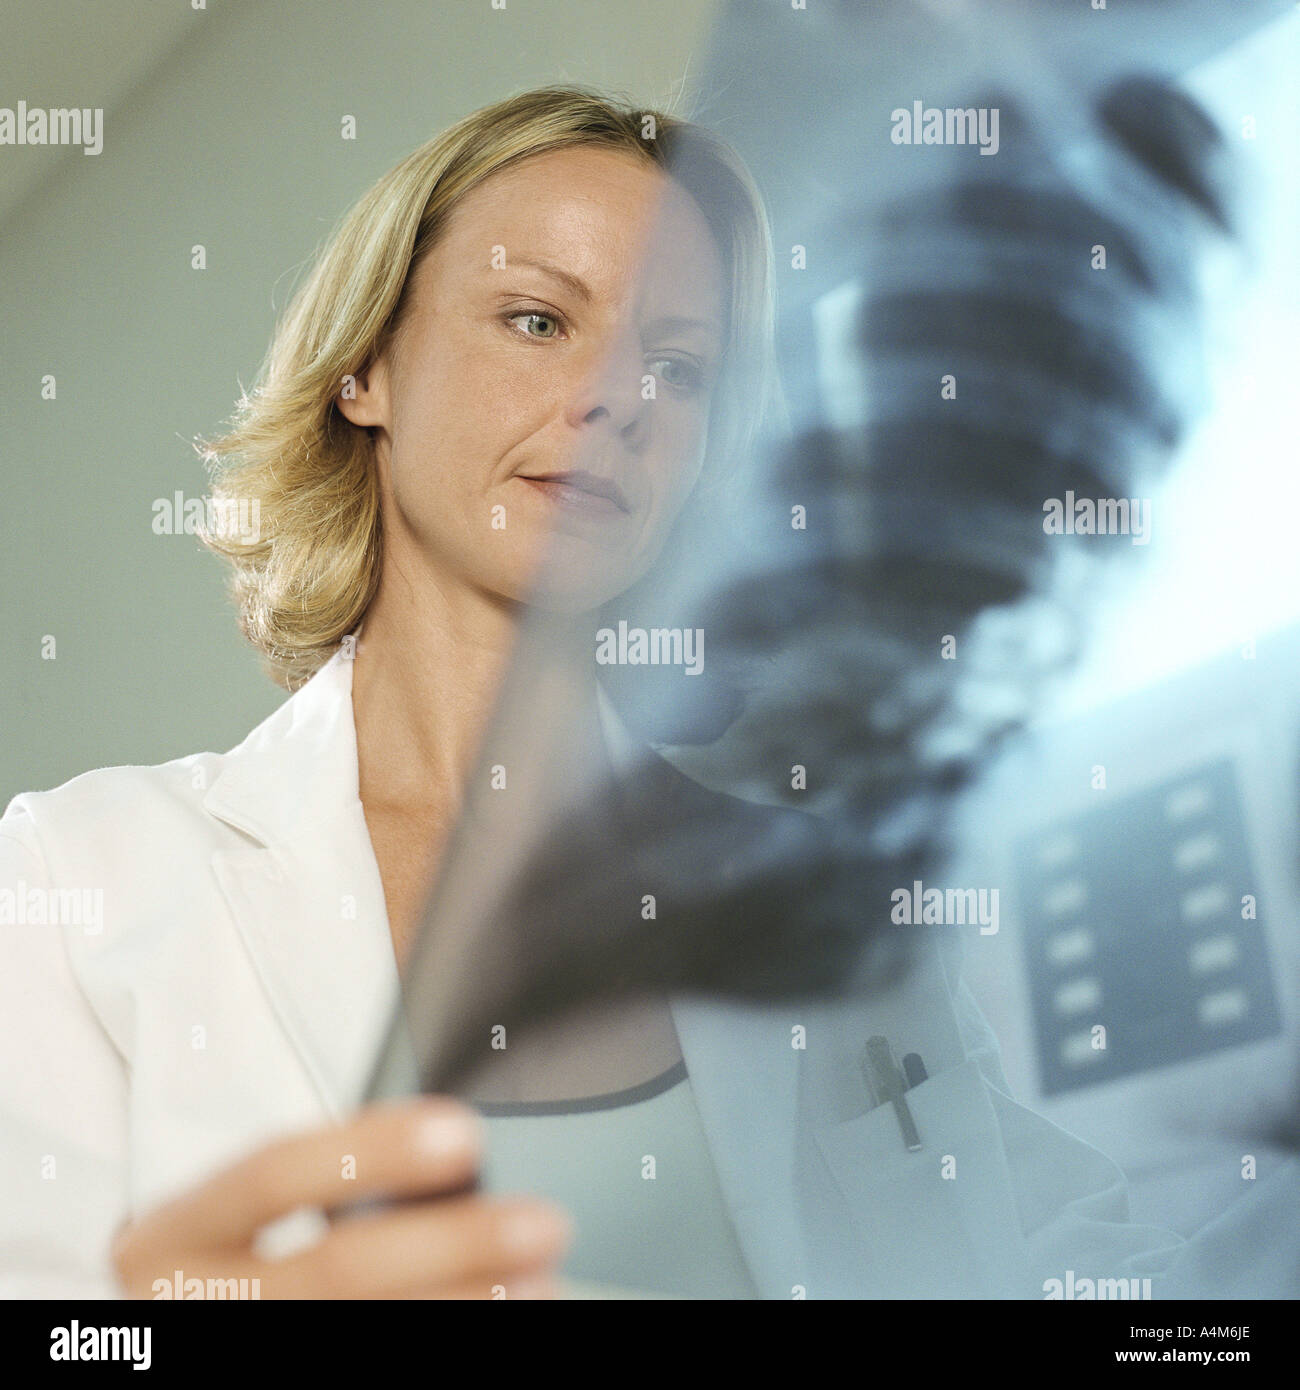 Female doctor in x-ray lab Stock Photo